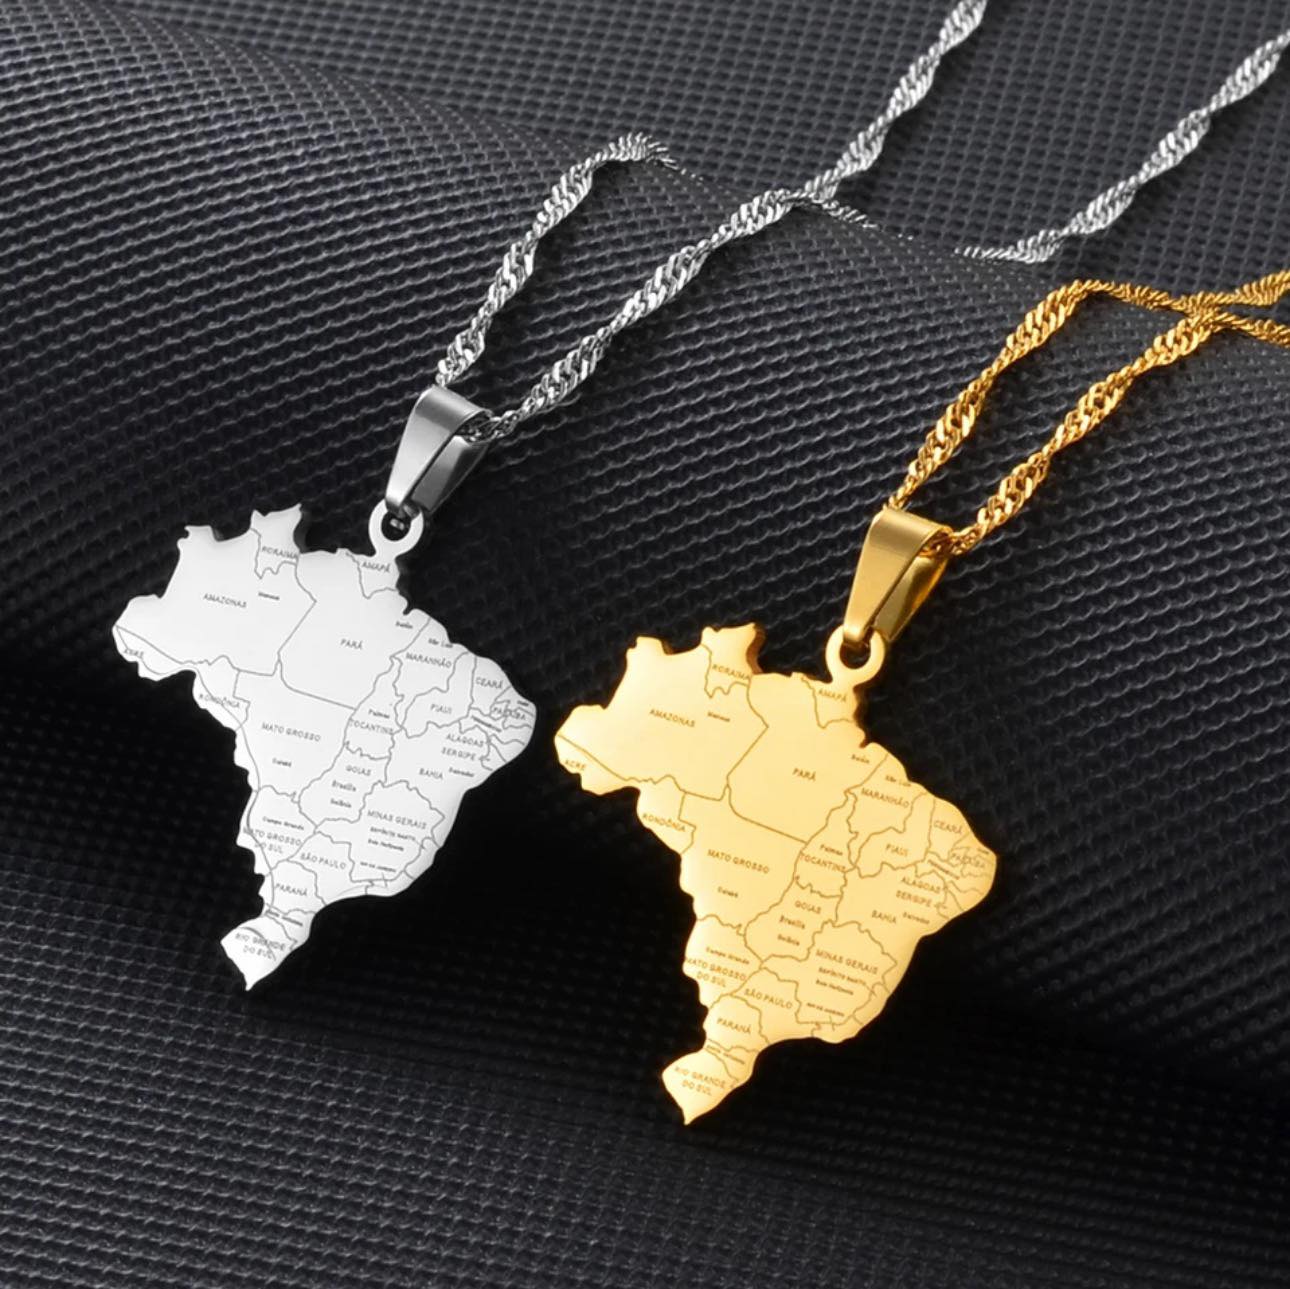 Brazil Map & Cities Necklace